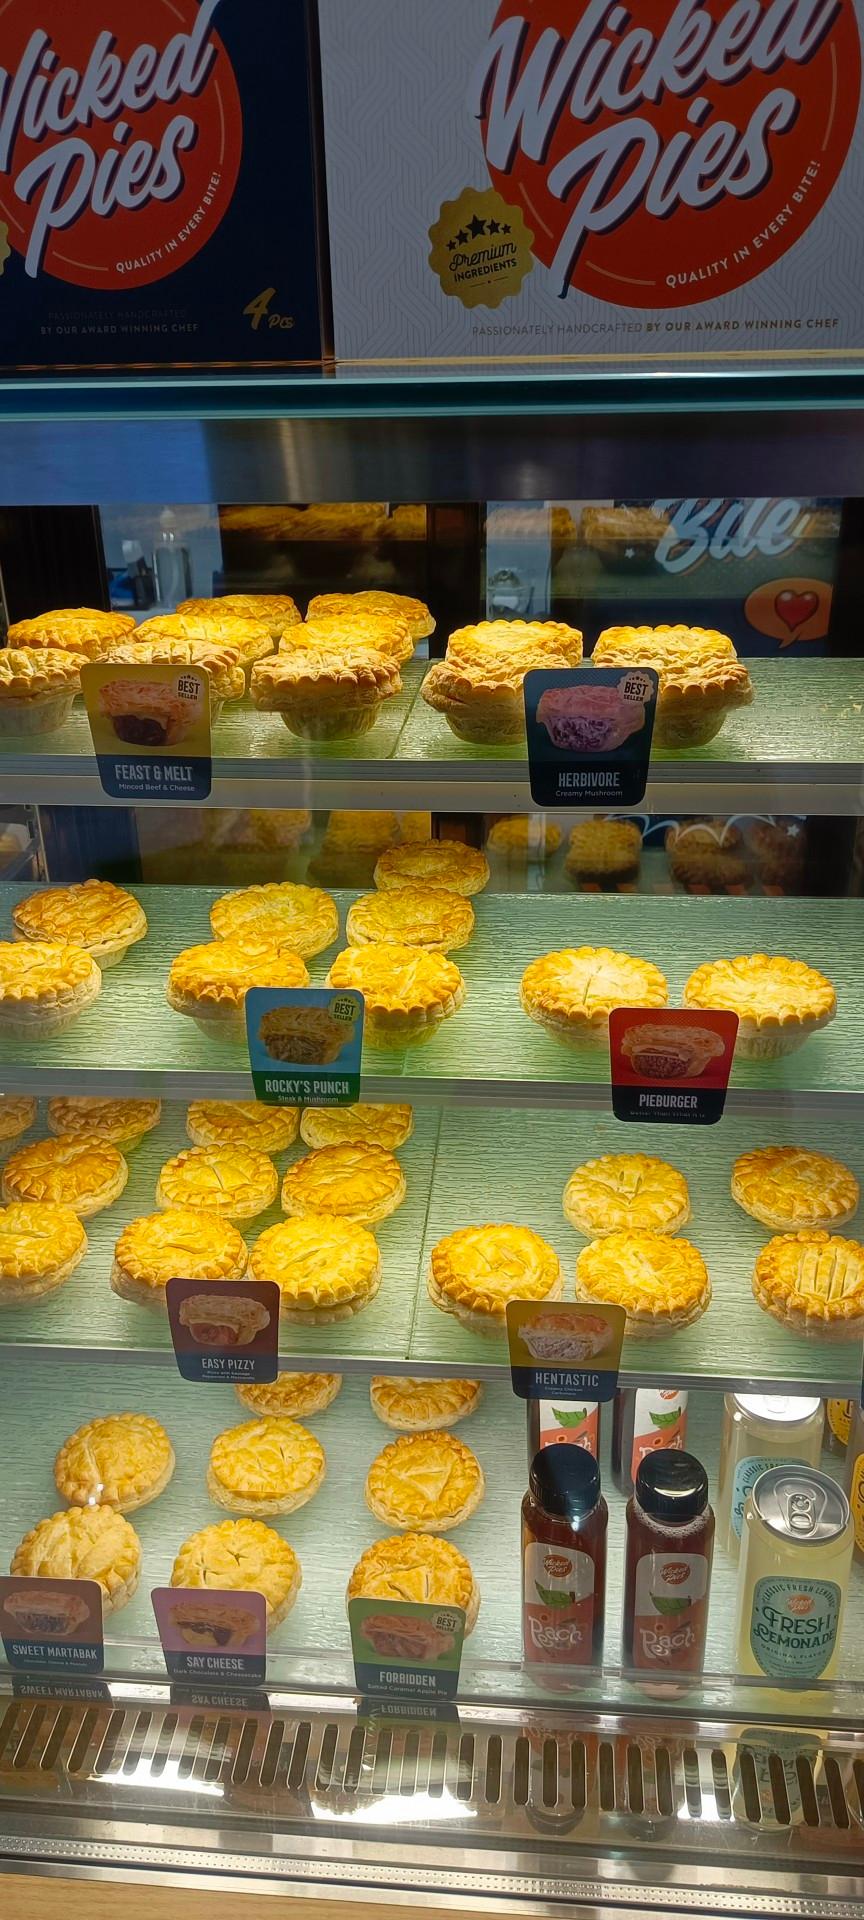 Wicked Pies - Lippo Mall Puri review